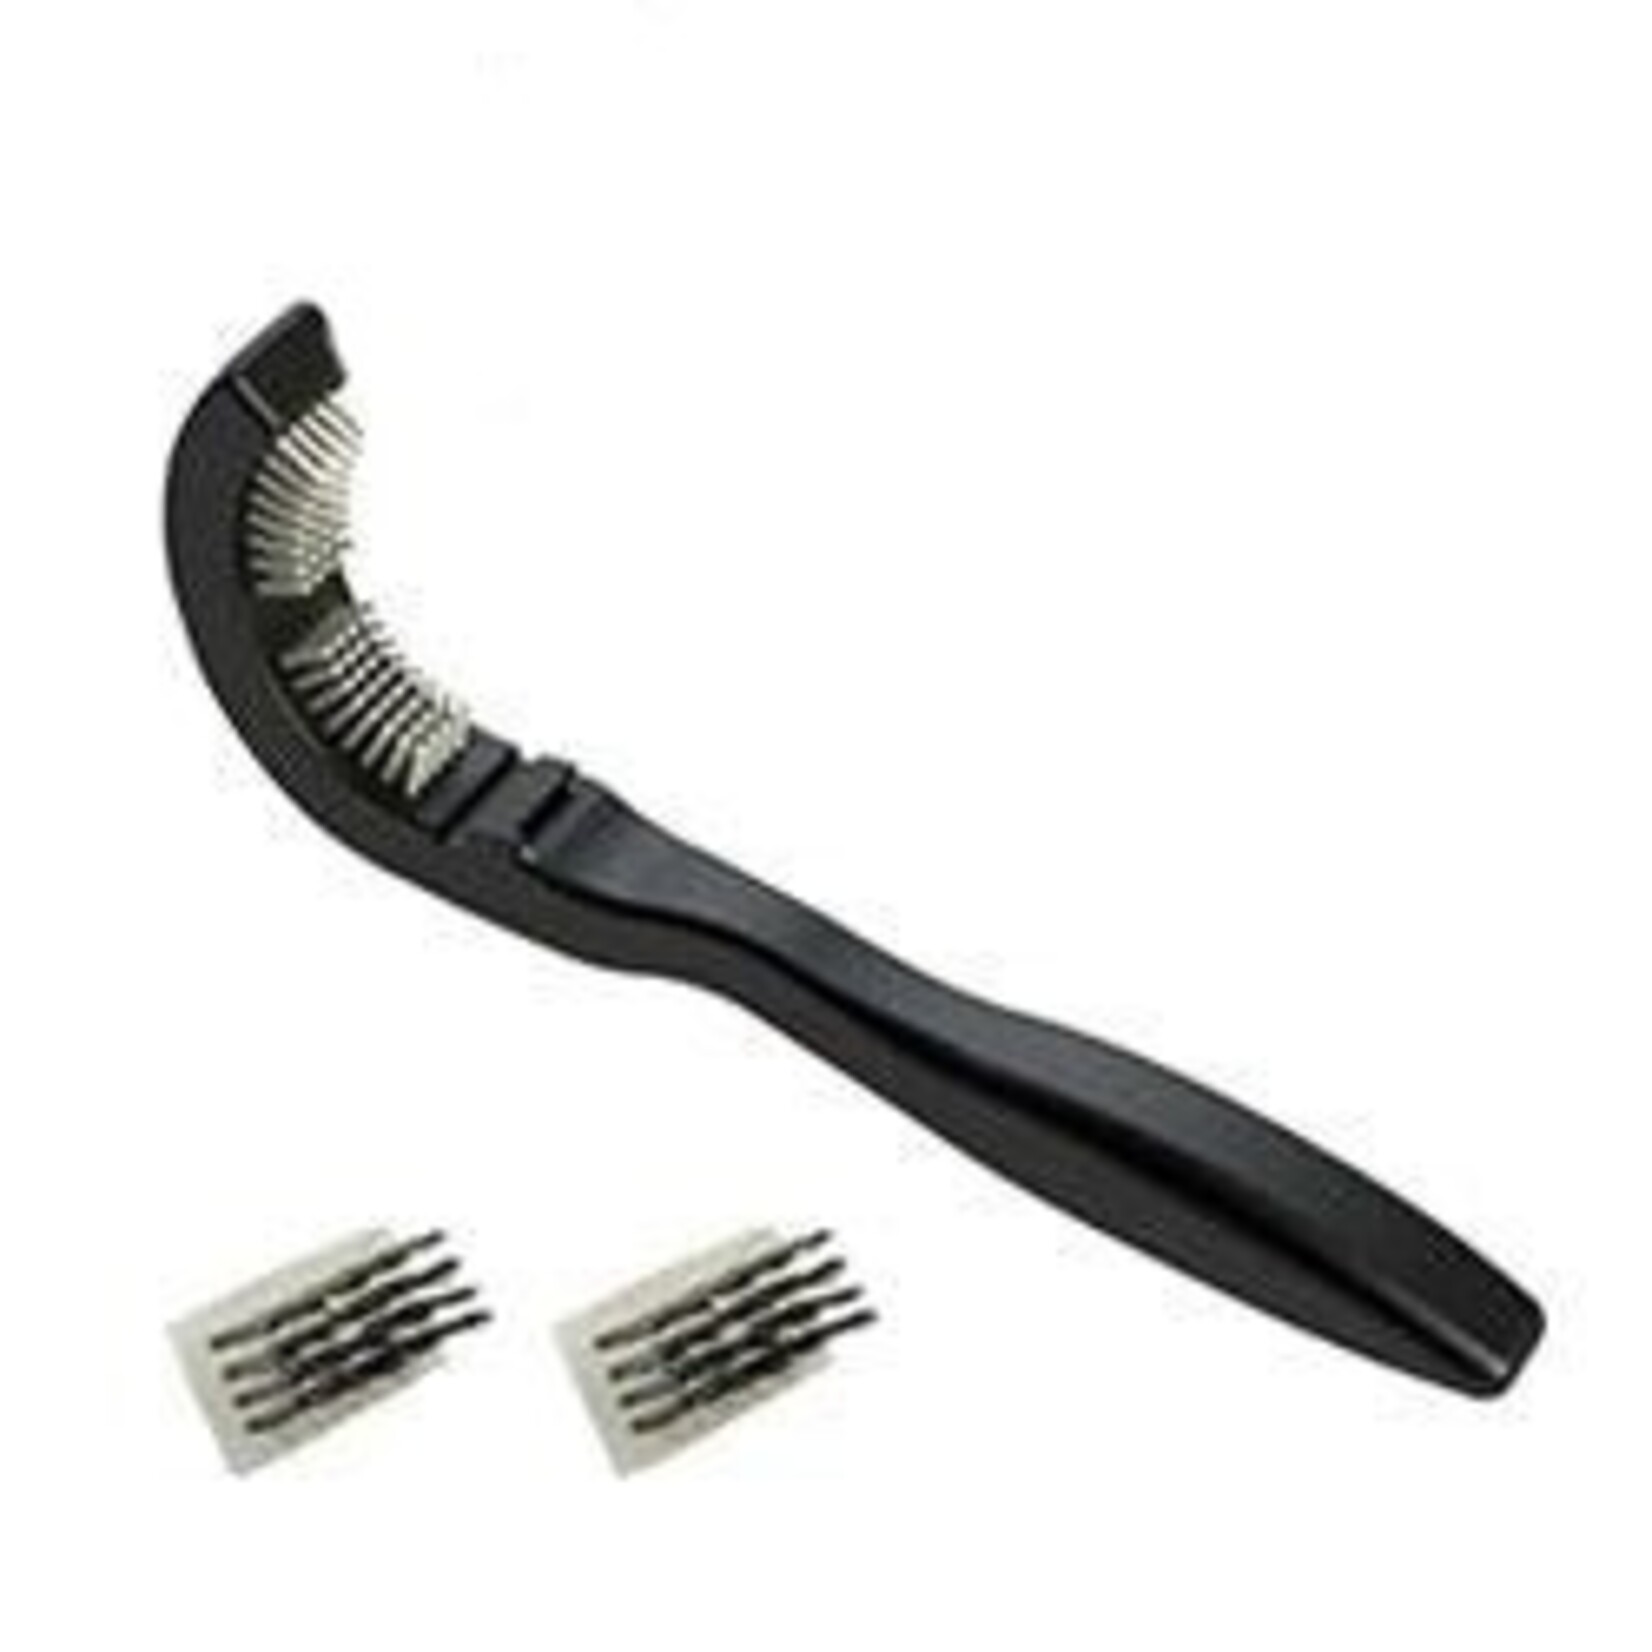 Super B SuperB 2 In 1 Brush Multi-Purpose Different Parts of Bicycle Cleaning-Bike Tool